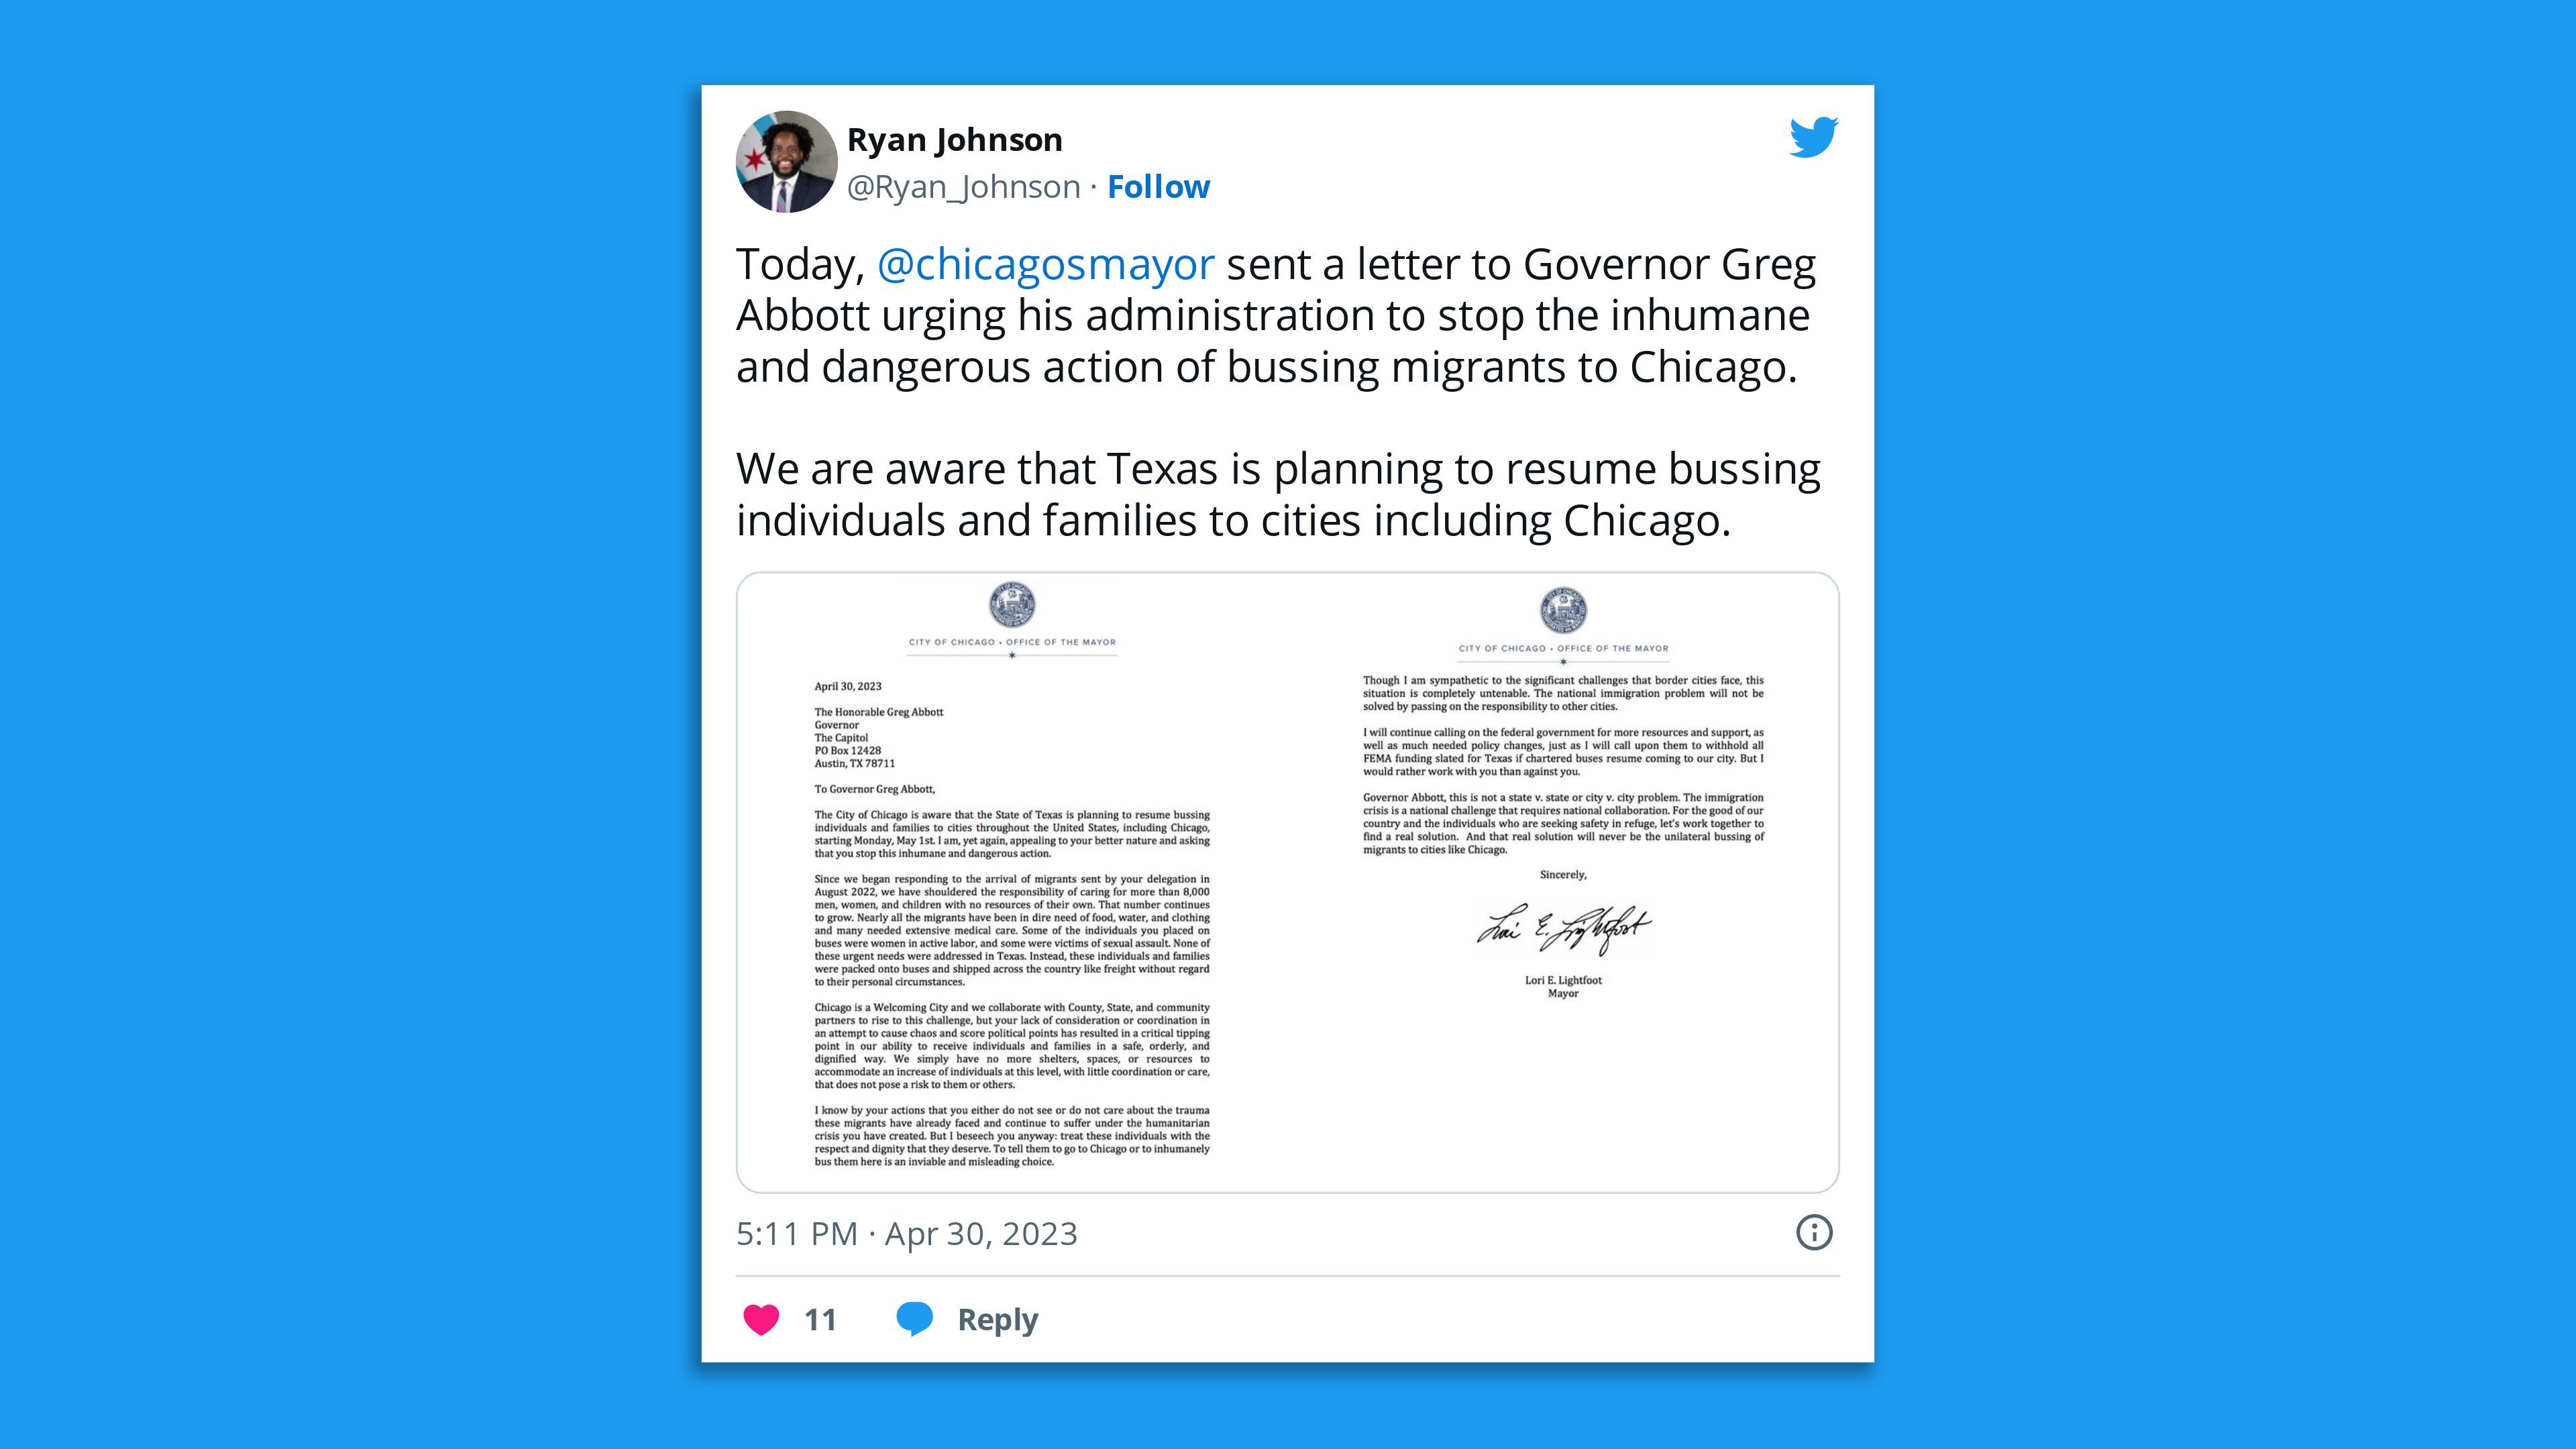 A screenshot of a tweet by a Chicago mayor spokesperson stating: "Today,  @chicagosmayor  sent a letter to Governor Greg Abbott urging his administration to stop the inhumane and dangerous action of bussing migrants to Chicago.   We are aware that Texas is planning to resume bussing individuals and families to cities including Chicago."